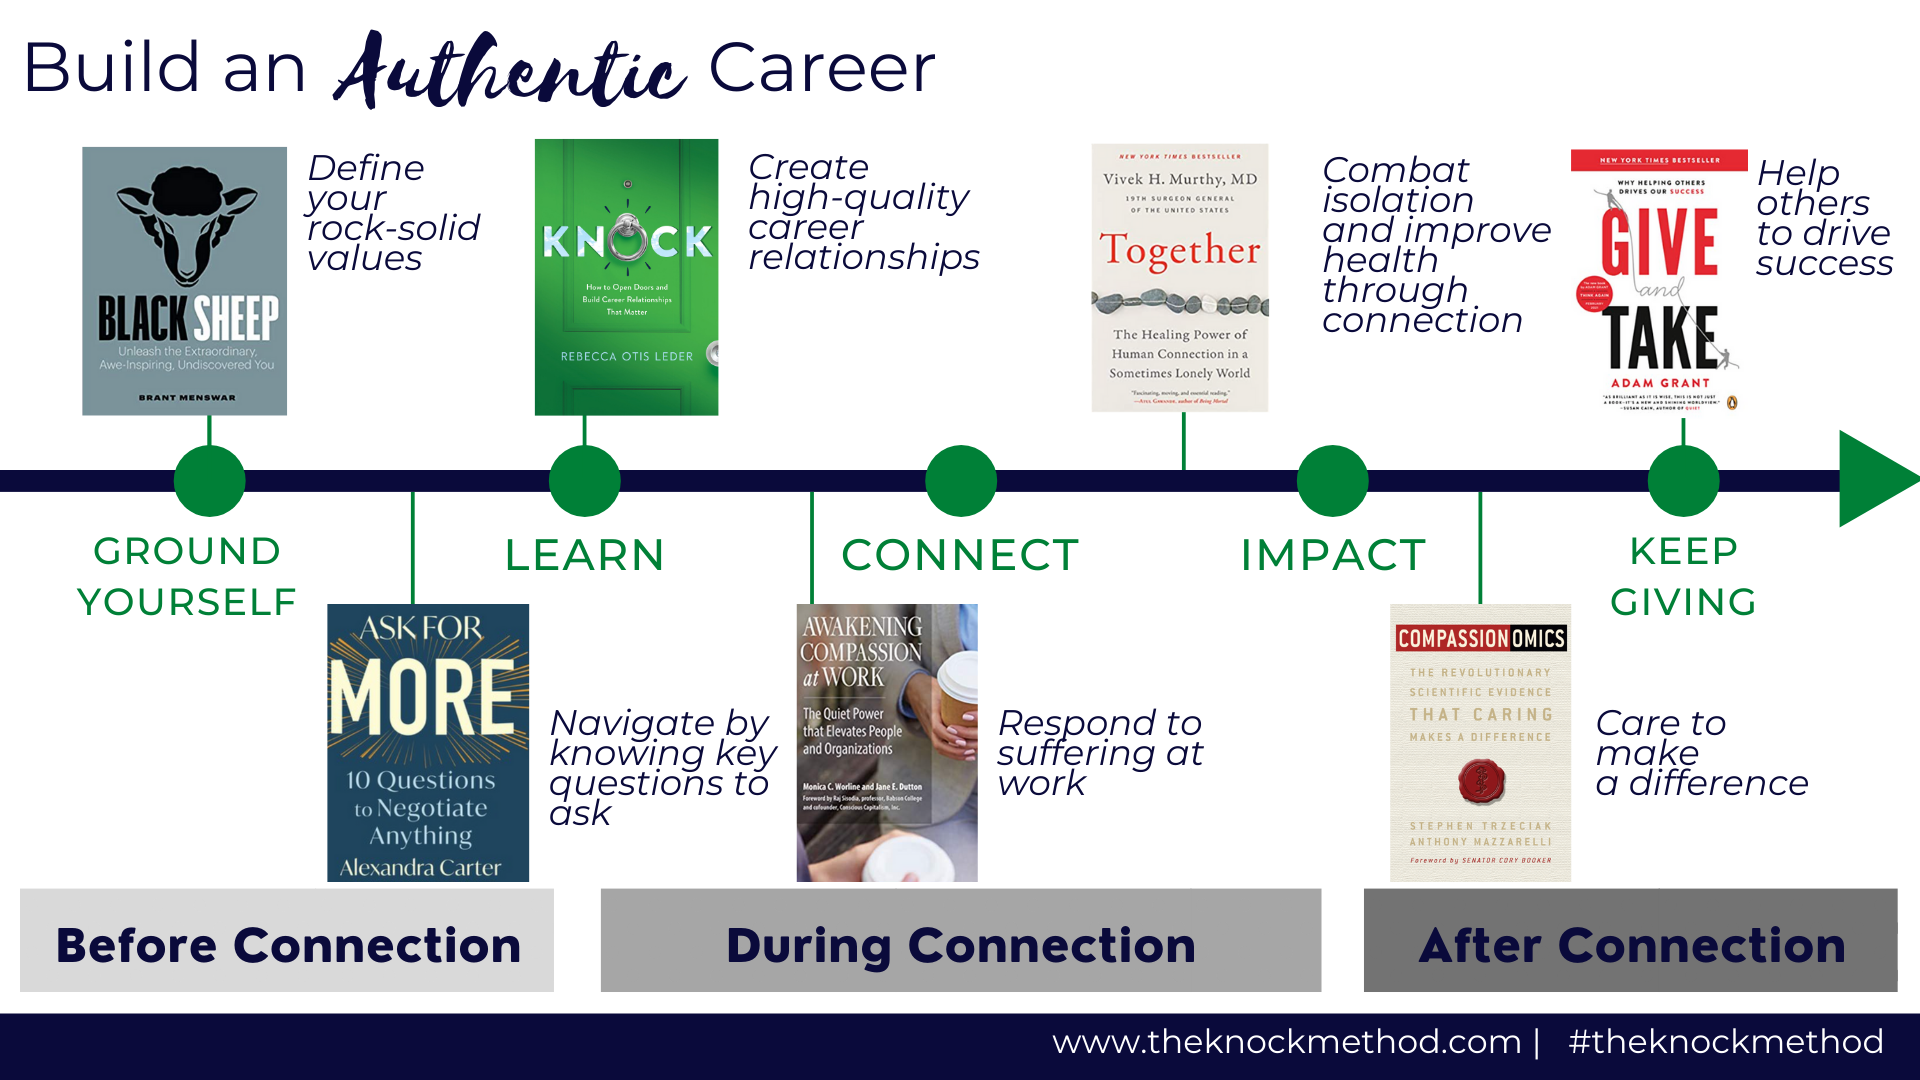 Learn How to Build an Authentic Career